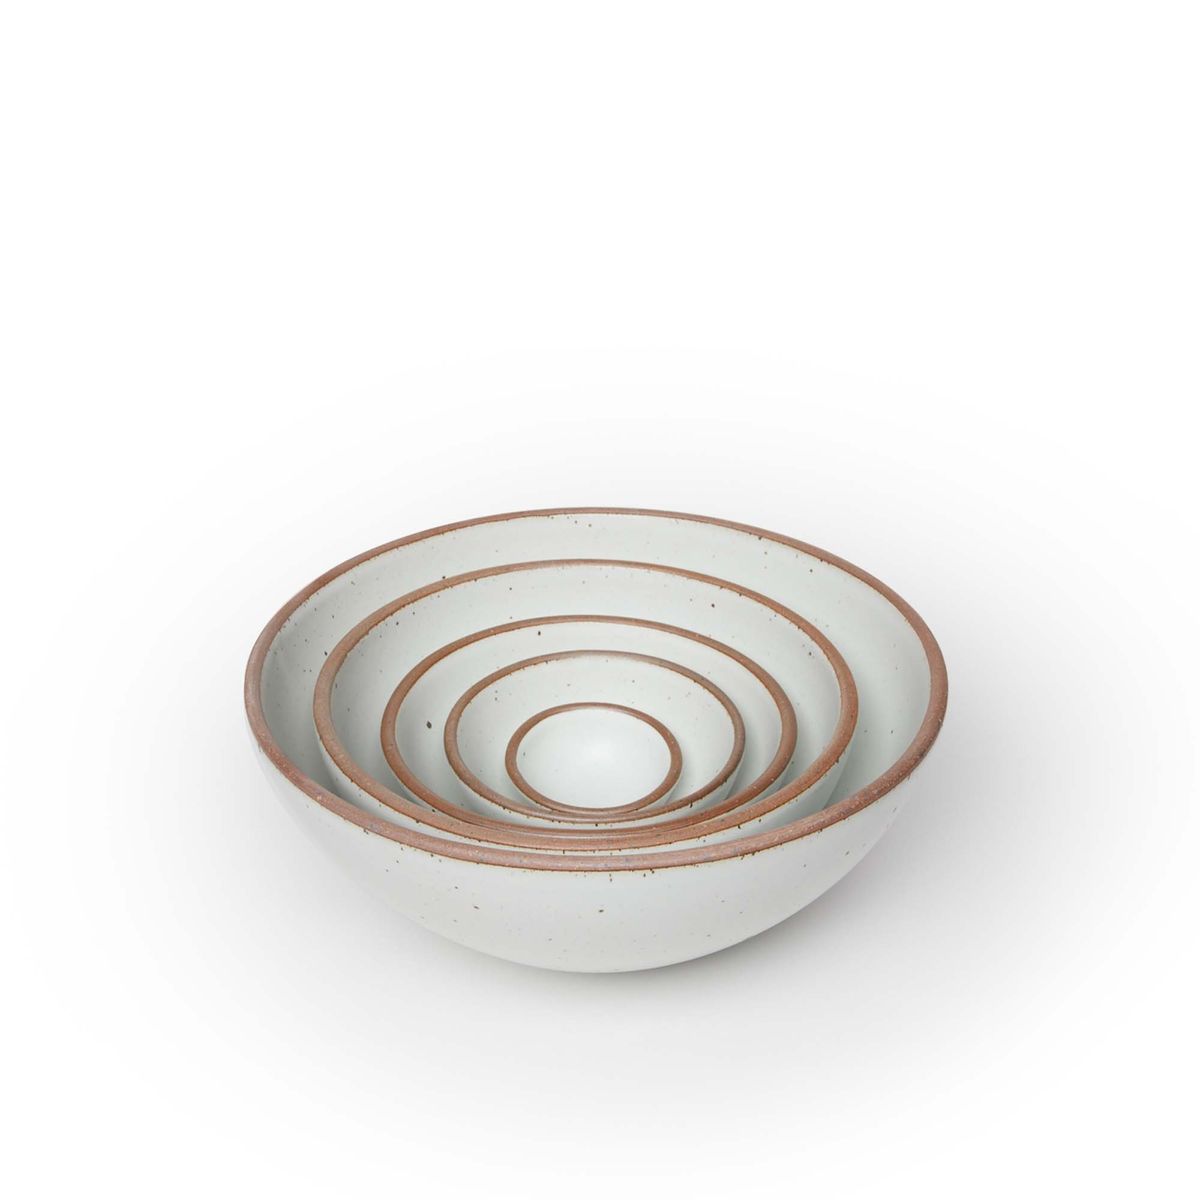 A bitty bowl, ice cream bowl, soup bowl, popcorn bowl, and mixing bowl nesting together in a cool white color featuring iron speckles